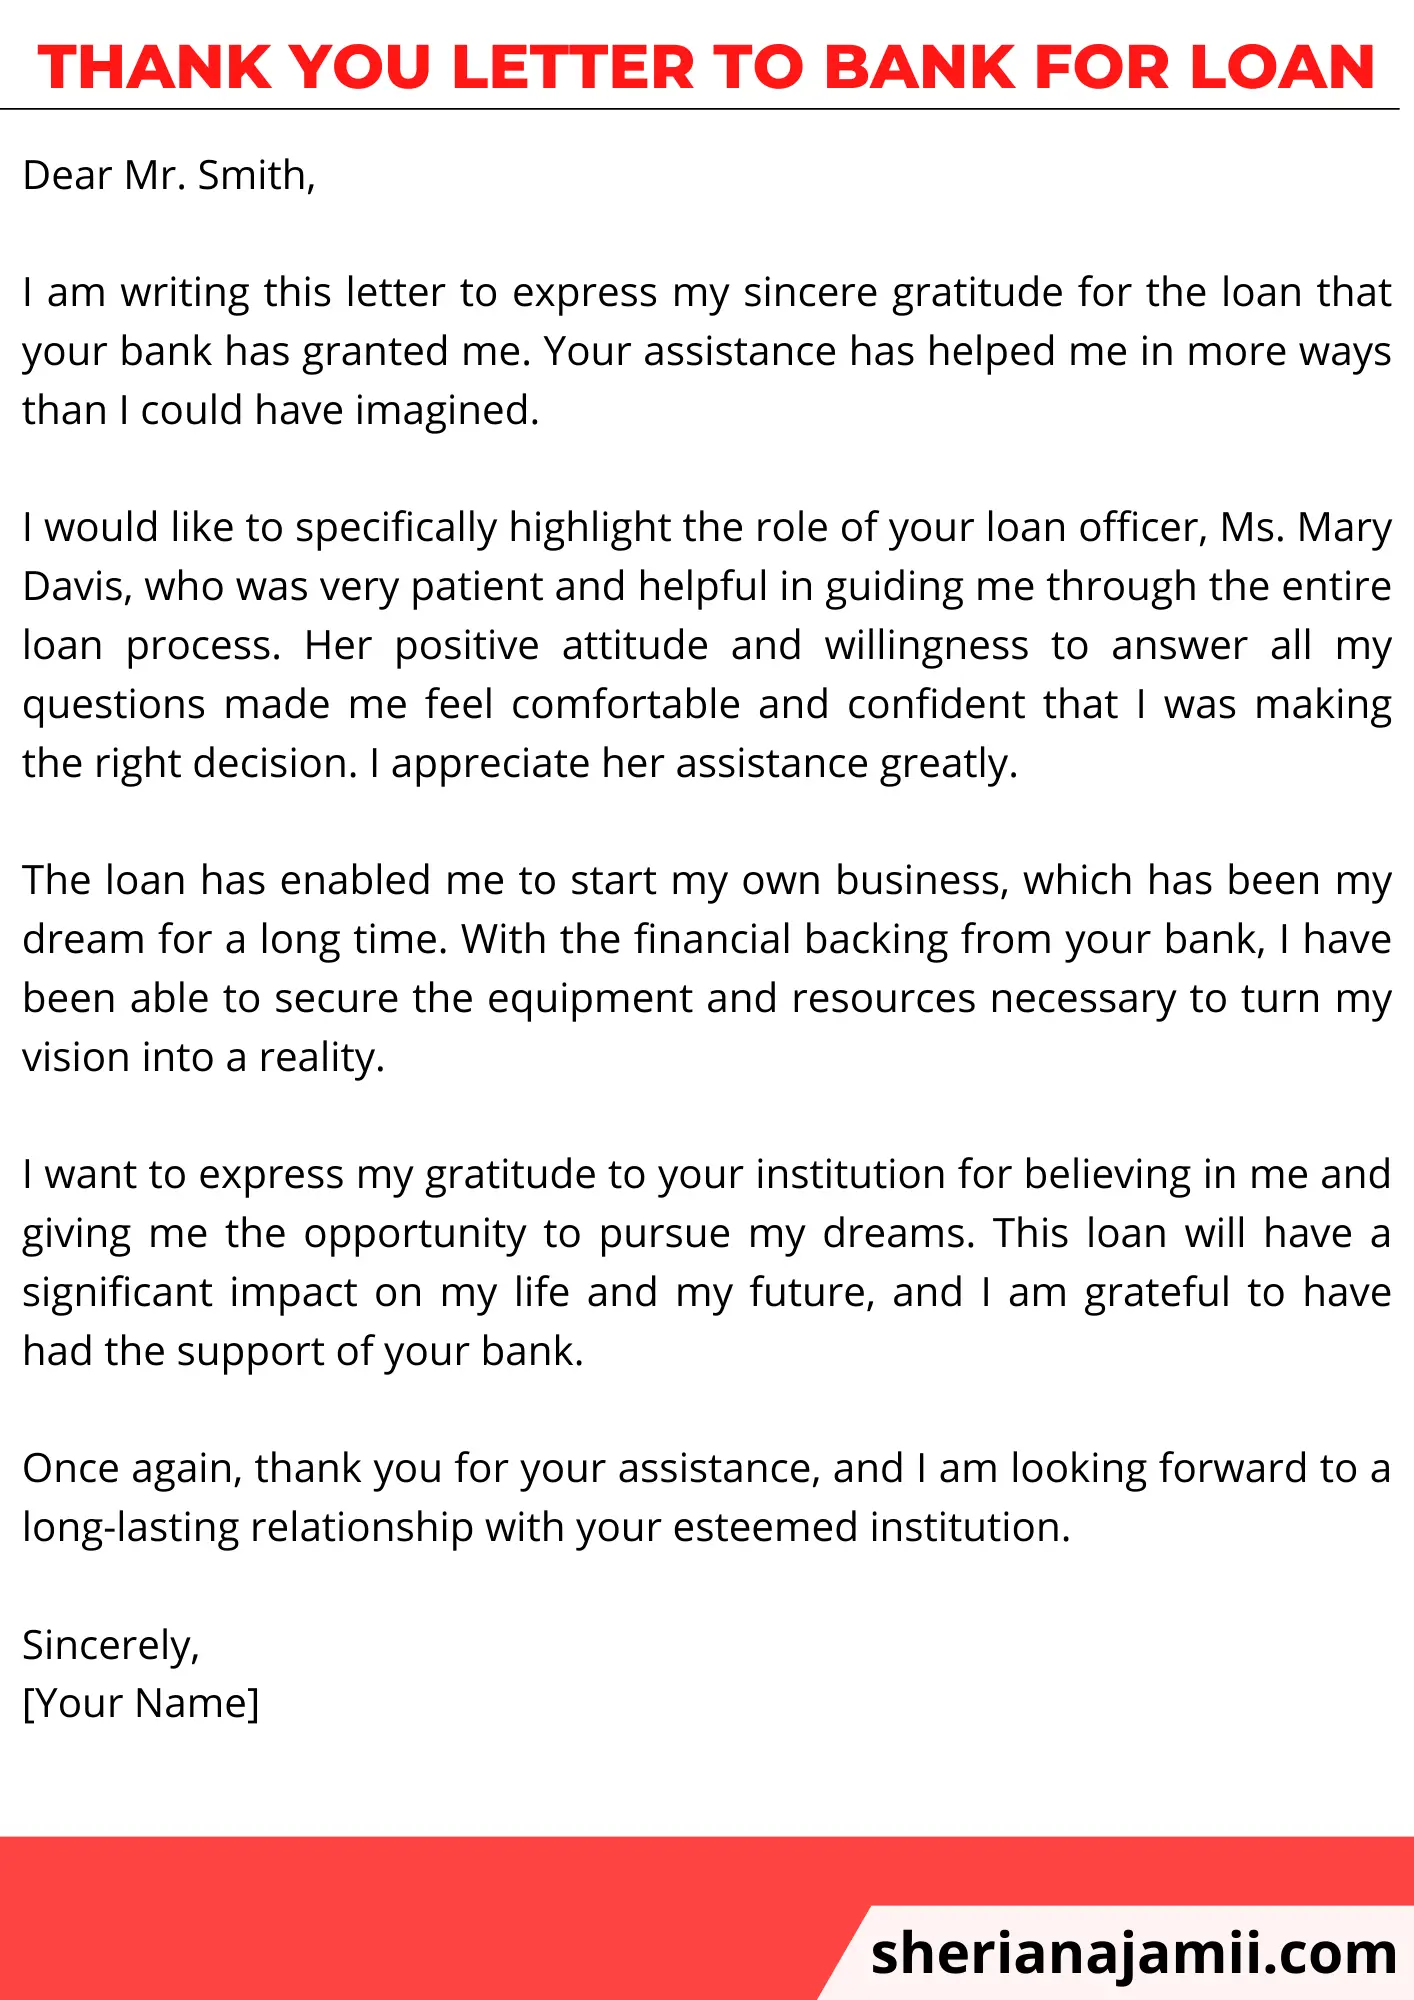 Thank you letter to bank for loan